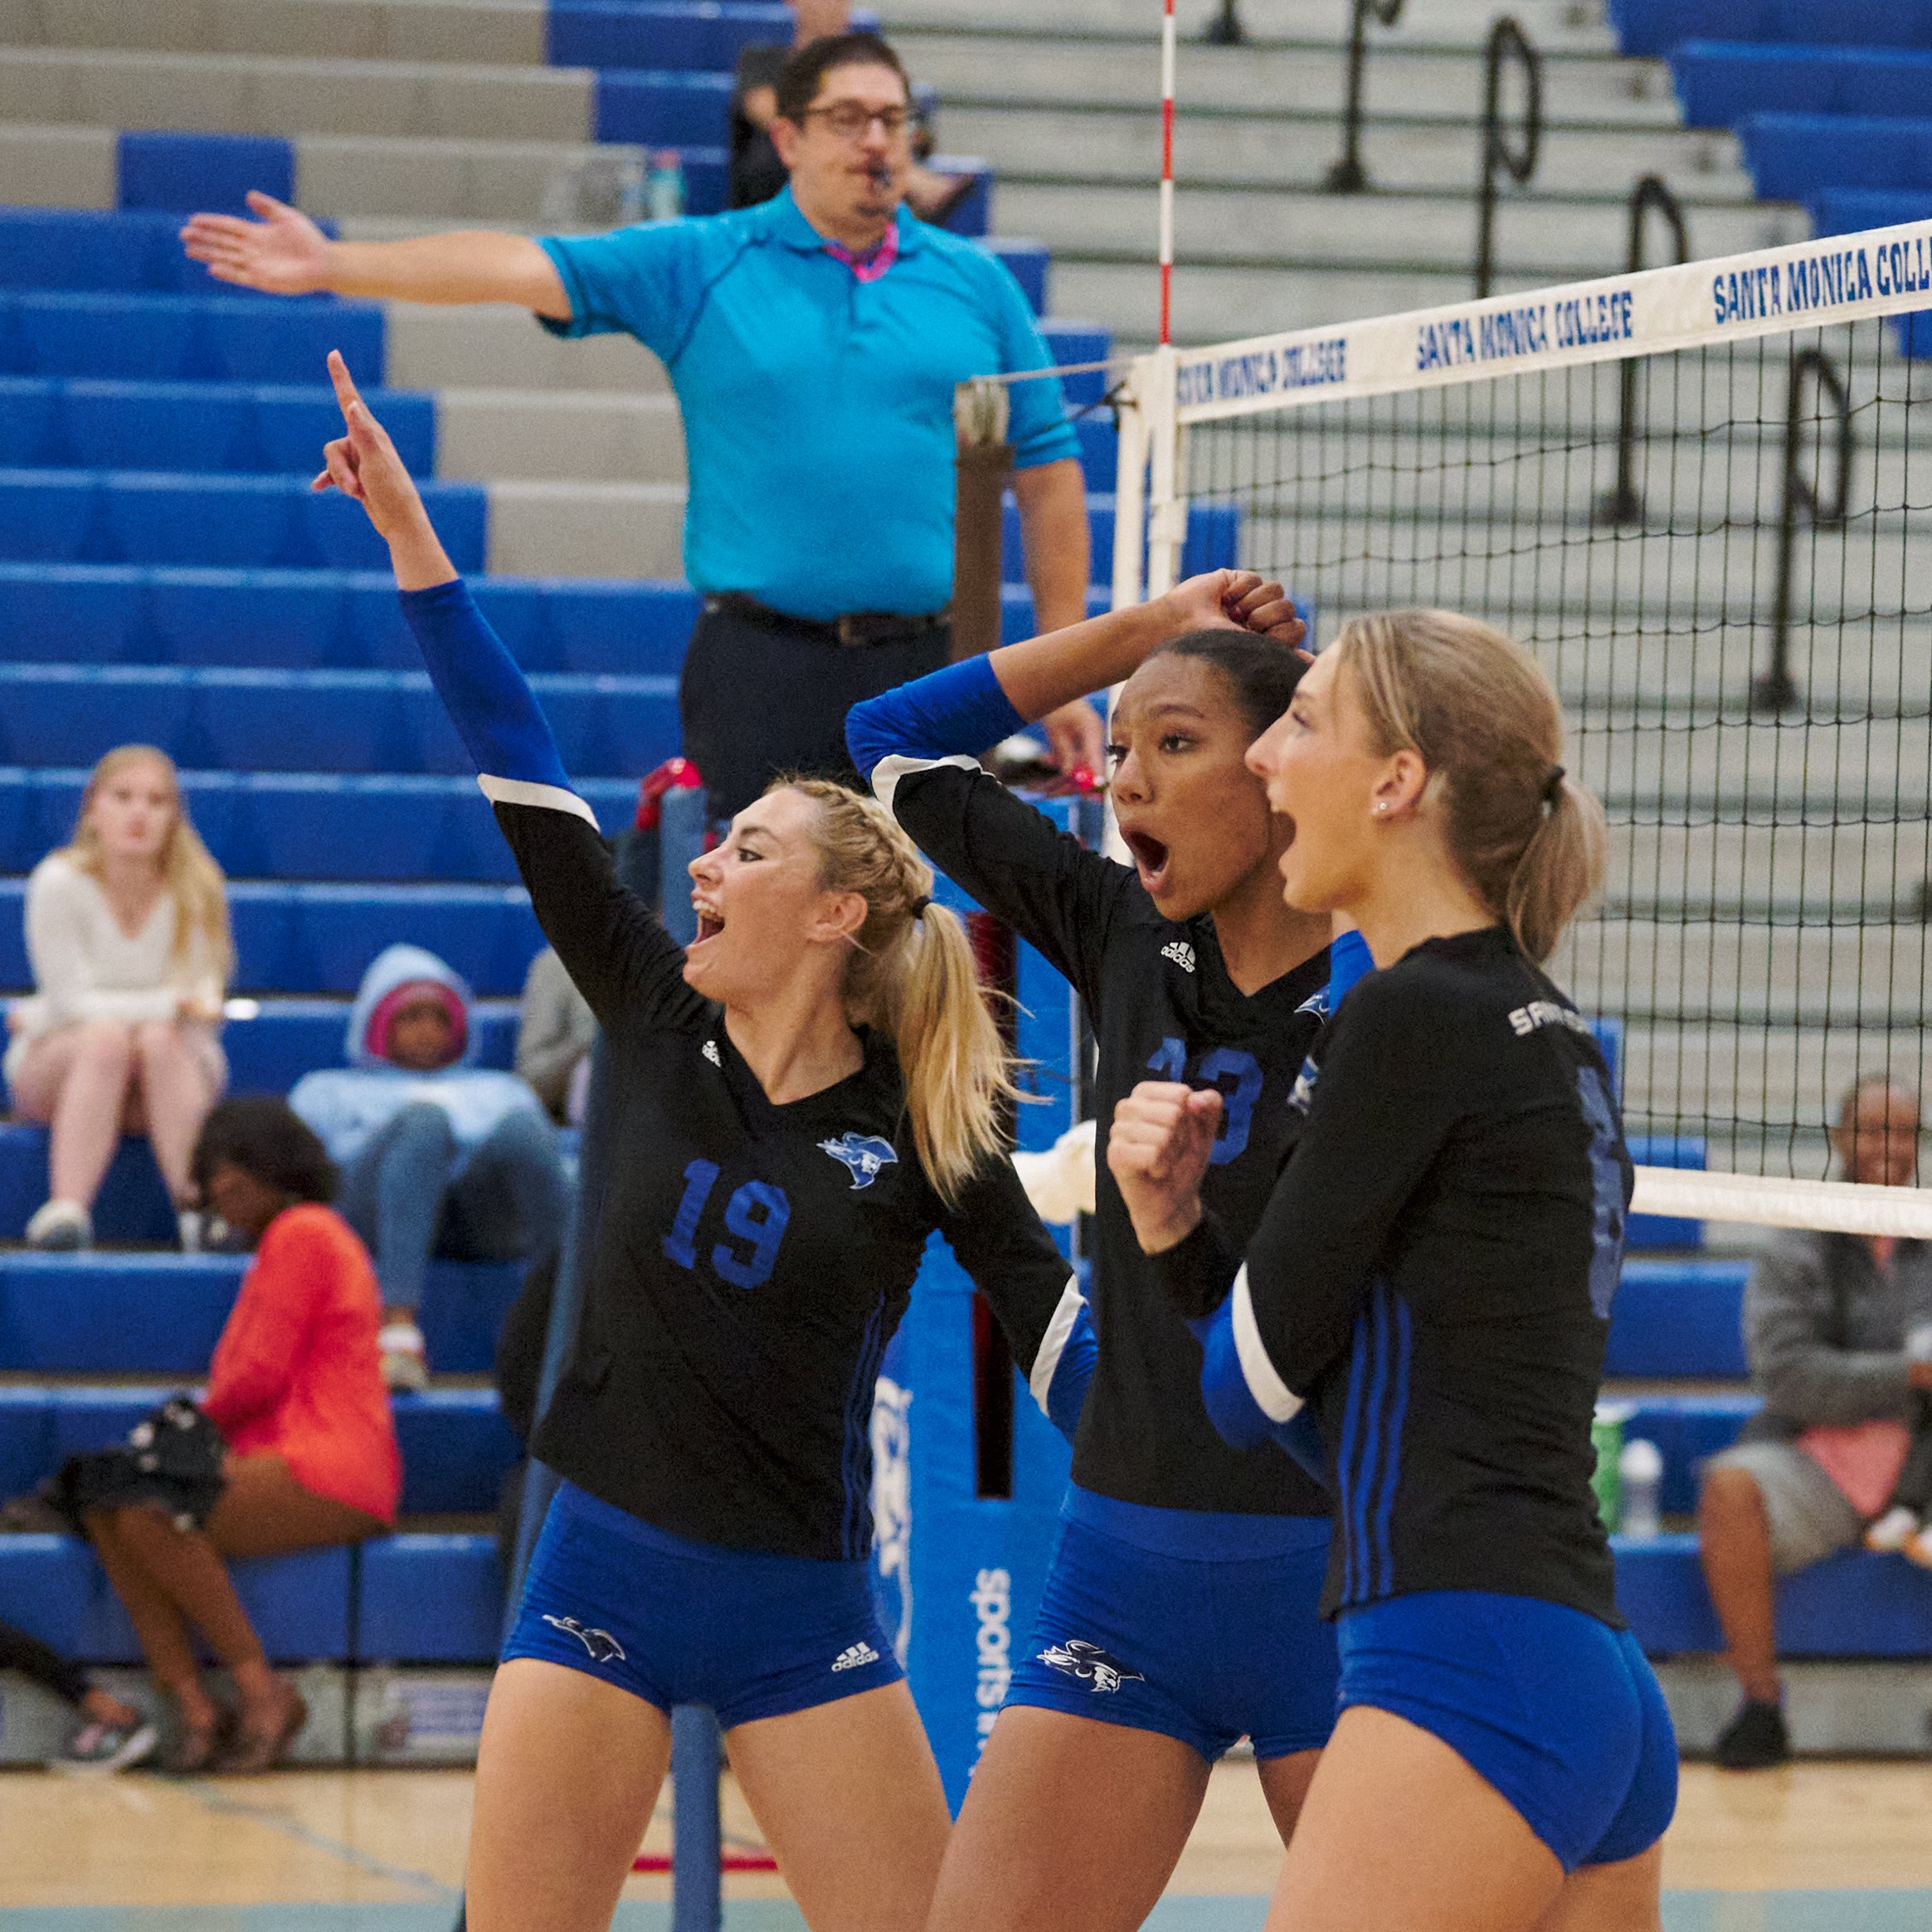  Santa Monica College Corsairs' Scheala Nielsen, Rain Martinez, and Sophia Lawrance celebrate after scoring a point during the women's volleyball match against the Antelope Valley College Marauders on Wednesday, Oct. 12, 2022, at the Corsair Gym in S